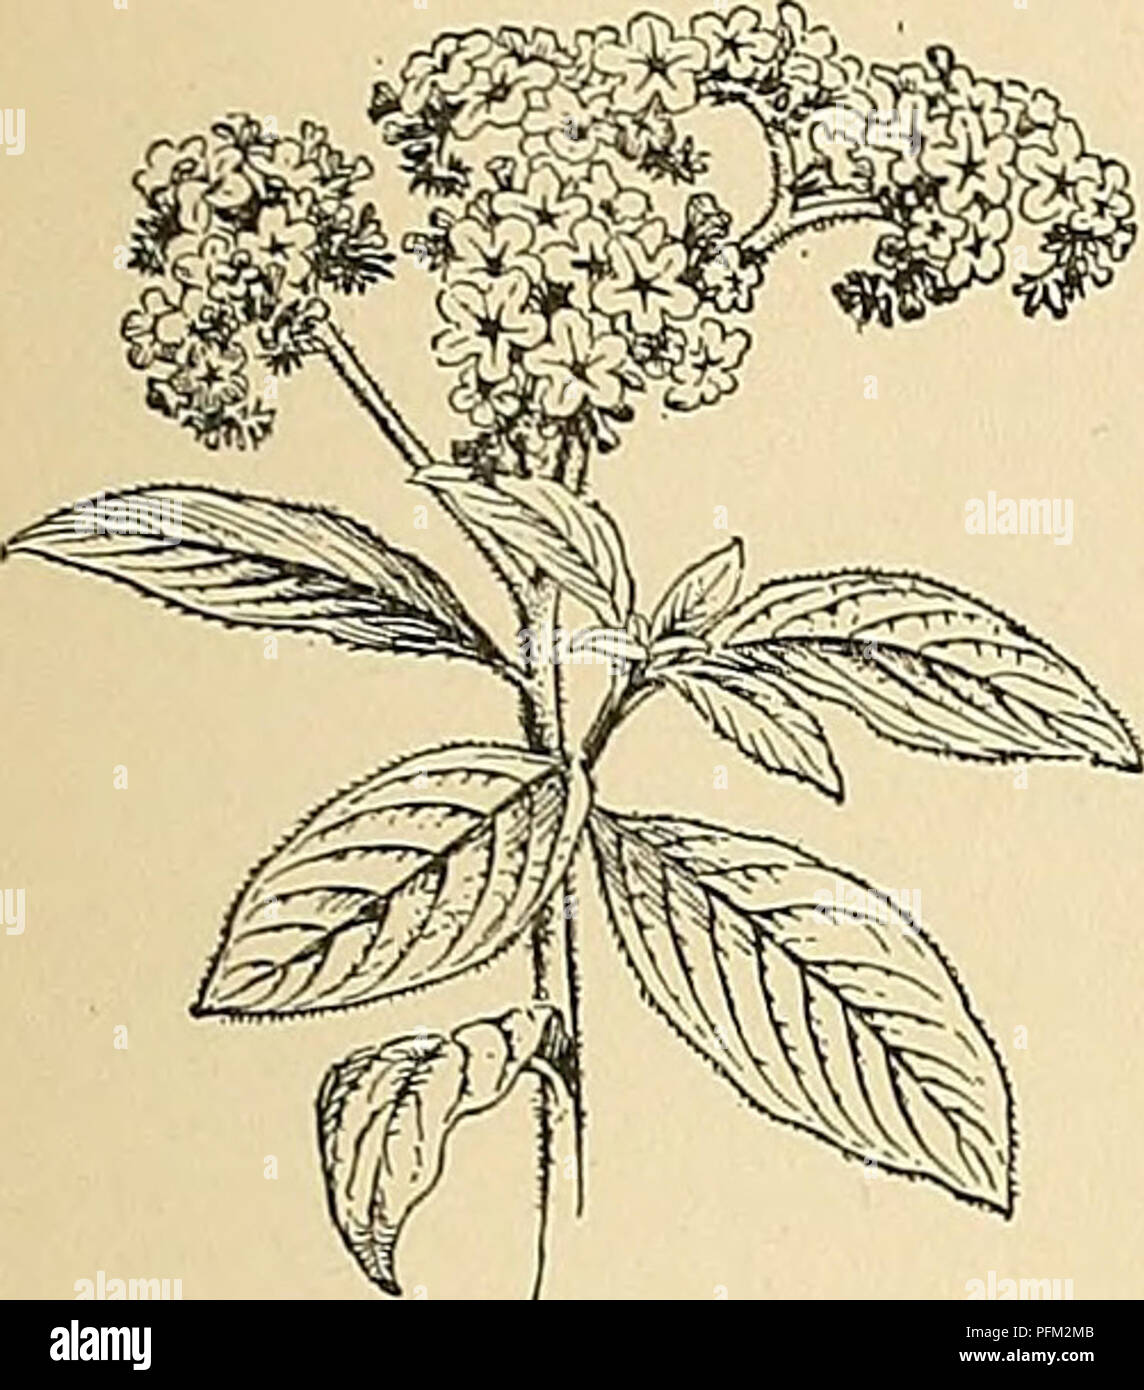 . Cyclopedia of American horticulture, comprising suggestions for cultivation of horticultural plants, descriptions of the species of fruits, vegetables, flowers, and ornamental plants sold in the United States and Canada, together with geographical and biographical sketches. Gardening. HELIOTROPIUM HELIPTERUM 725. 1032. Heliotropium Peruvianum. (R. grandiflorum, Don), has longer and relatively nar- rower ivs., &quot;wbicli are distinctly narrowed to the base, flower-clusters larger and more open, lis. nearly twice larger and the corolla tube nearly twice longer than the calyx ; calyx teeth lo Stock Photo